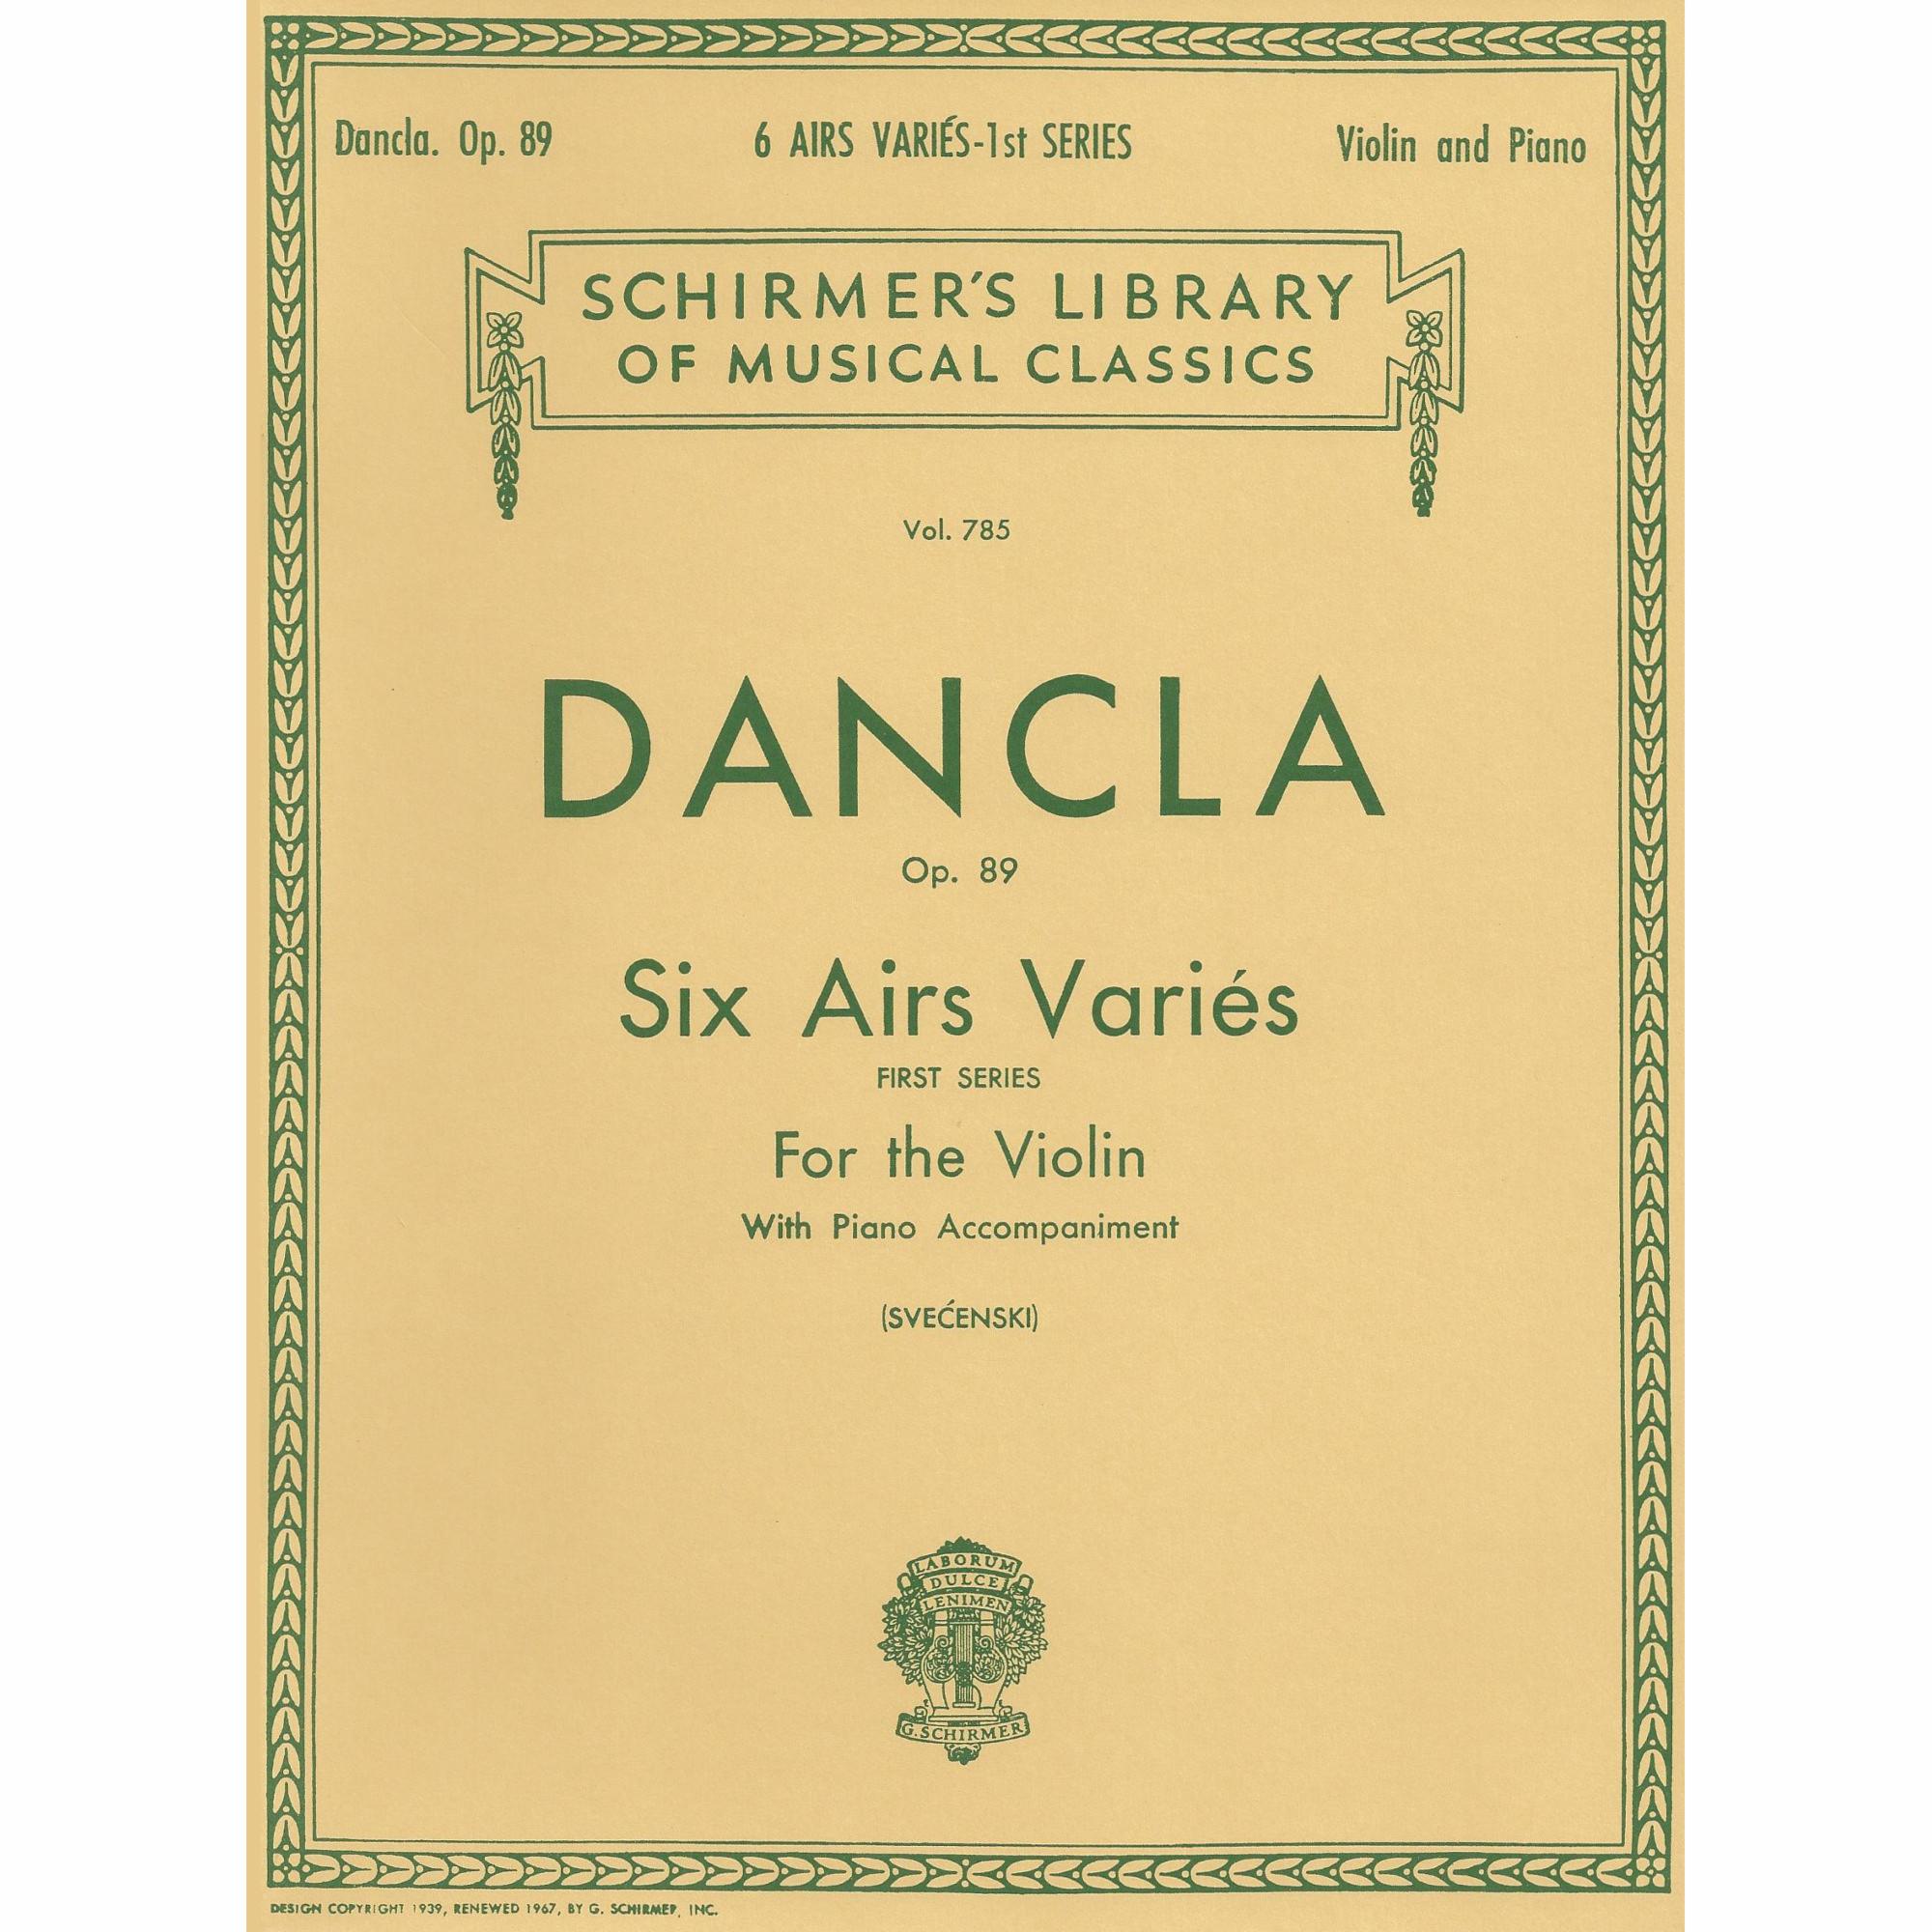 Dancla -- Six Airs Varies, Op. 89 for Violin and Piano